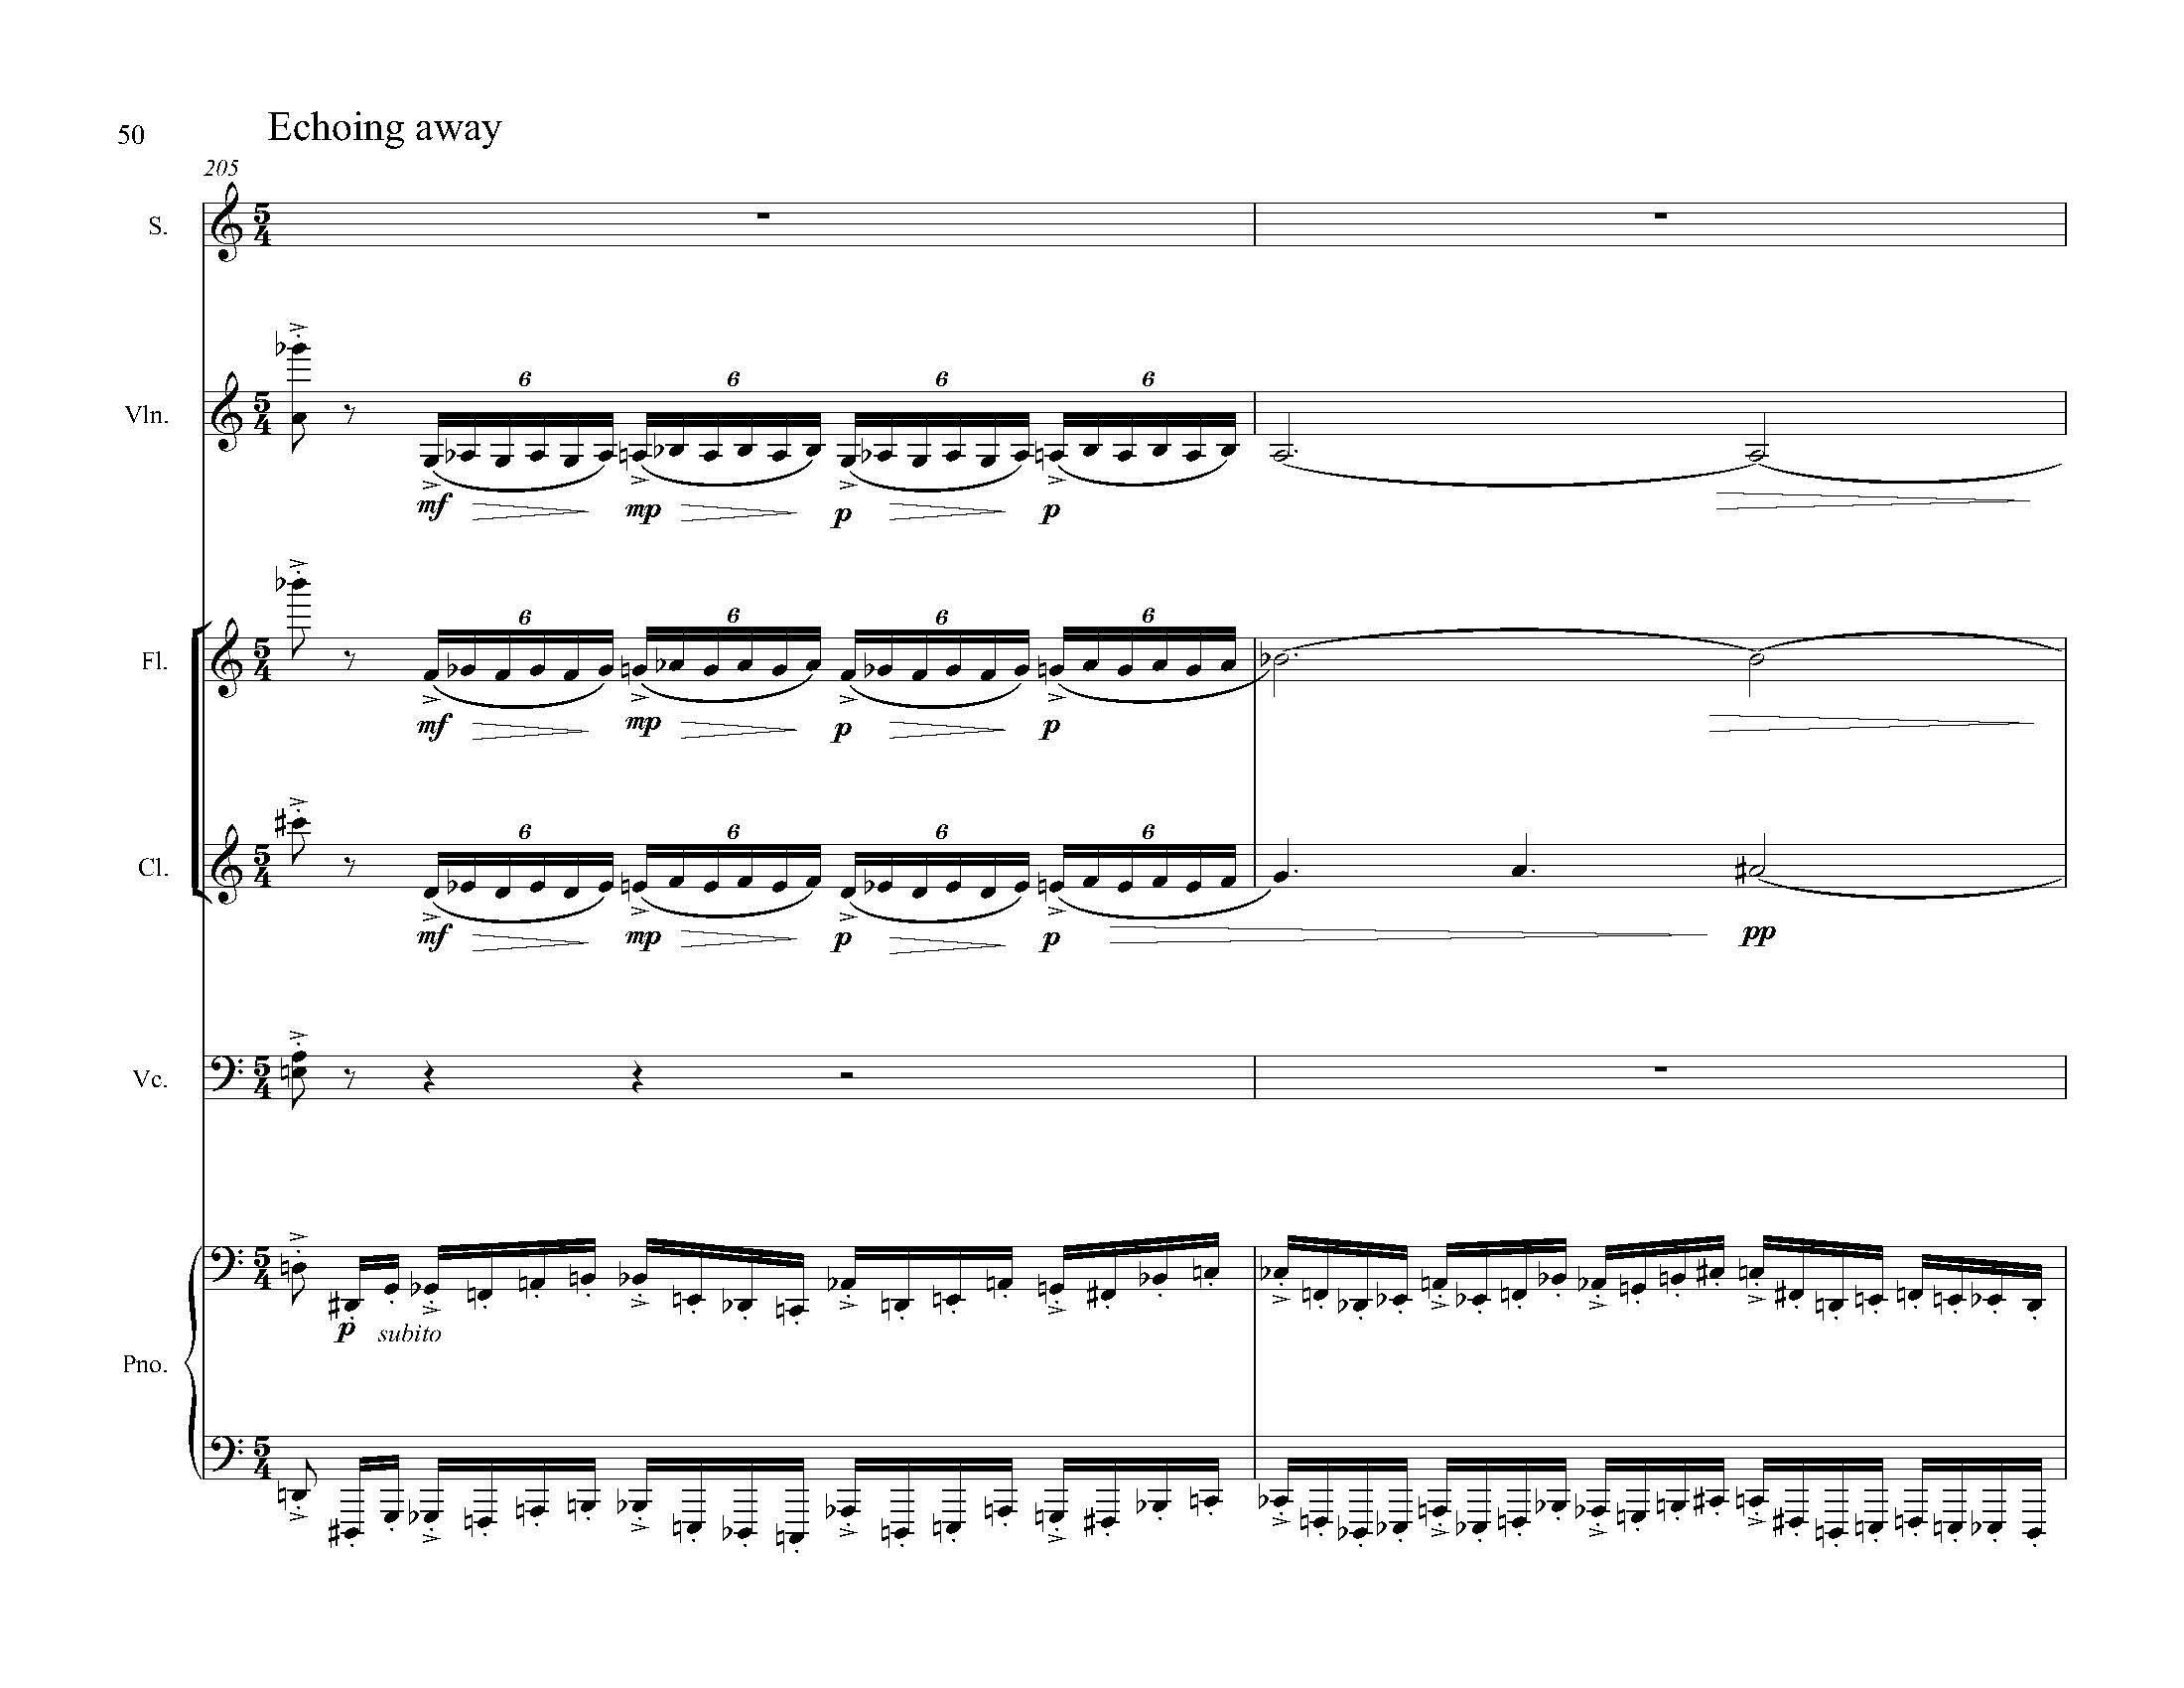 The Hill Wife - Complete Score_Page_058.jpg